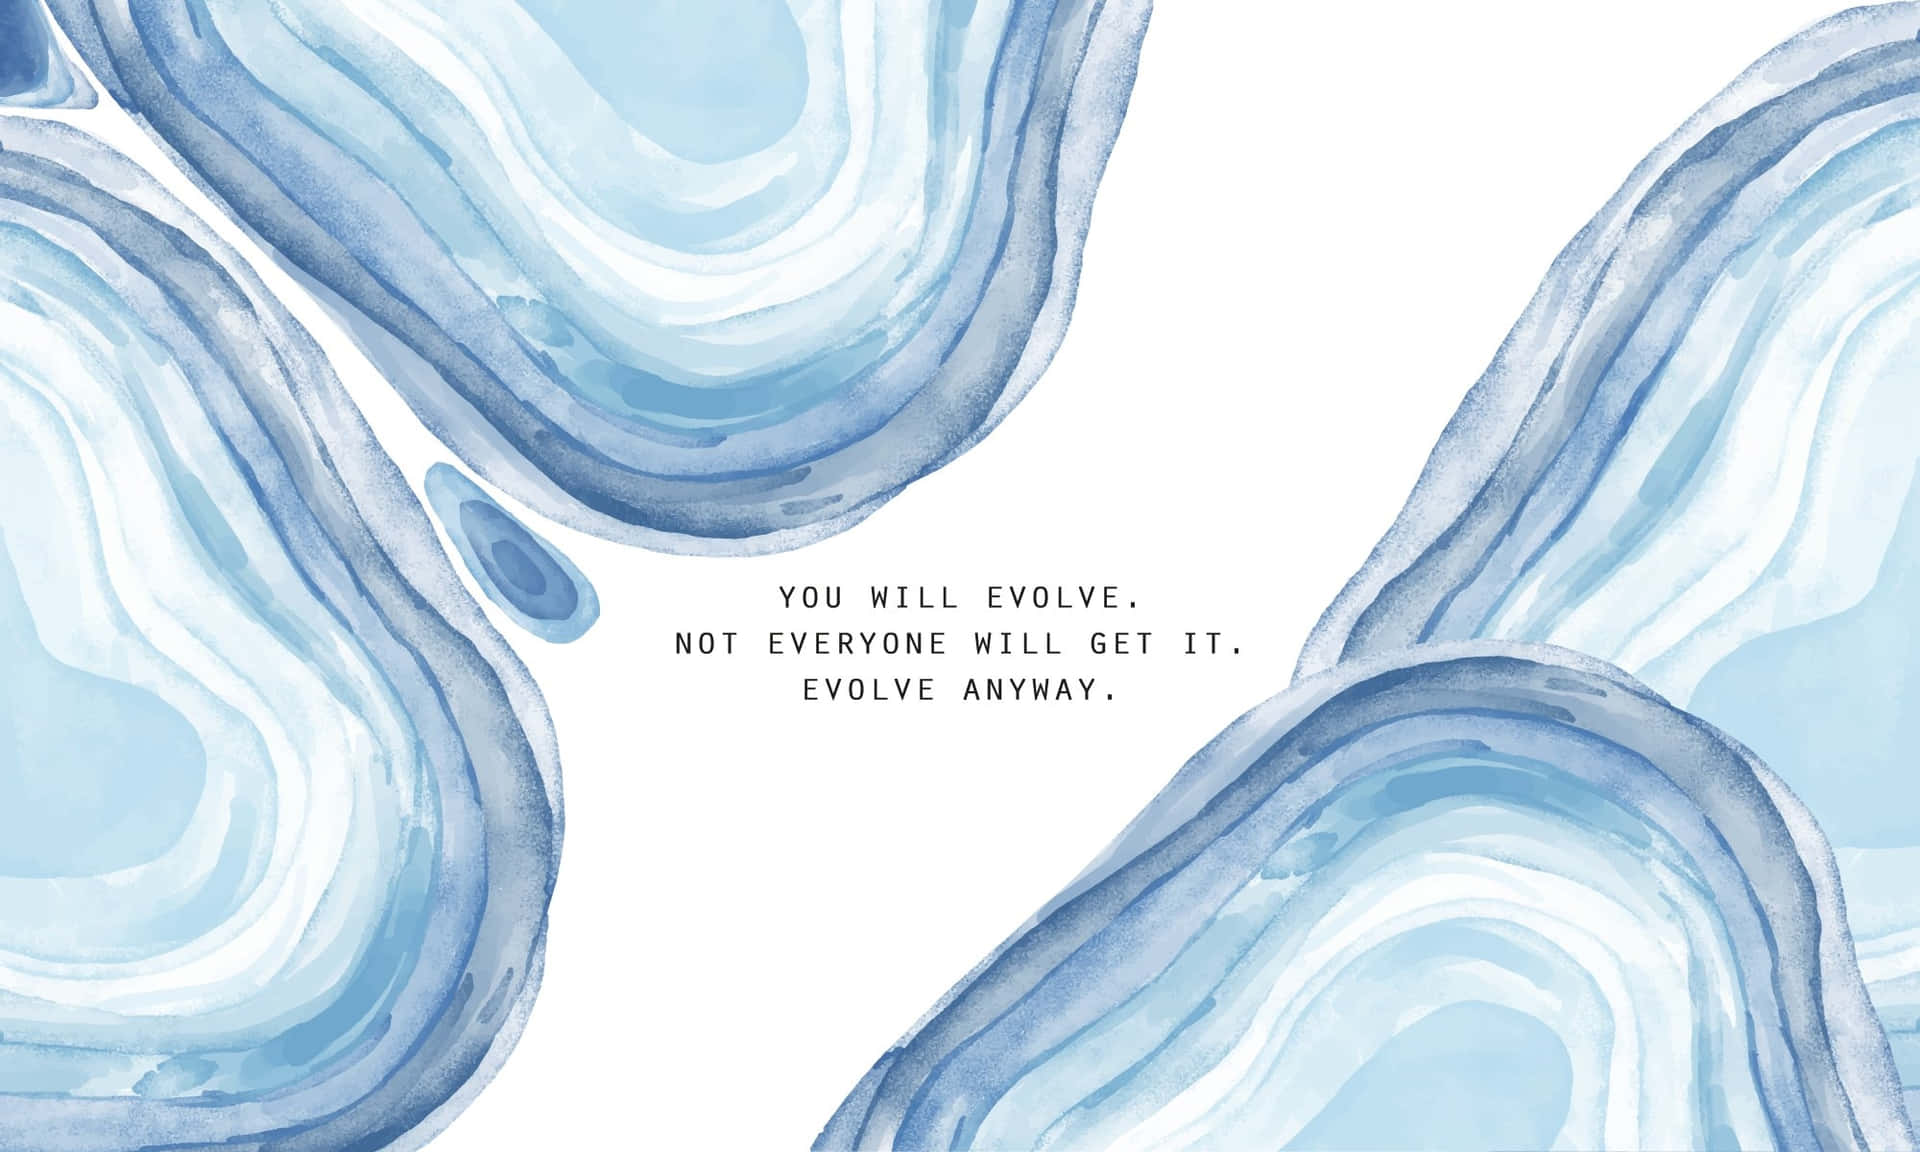 Evolve Anyway Inspirational Quote Watercolor Background.jpg Wallpaper